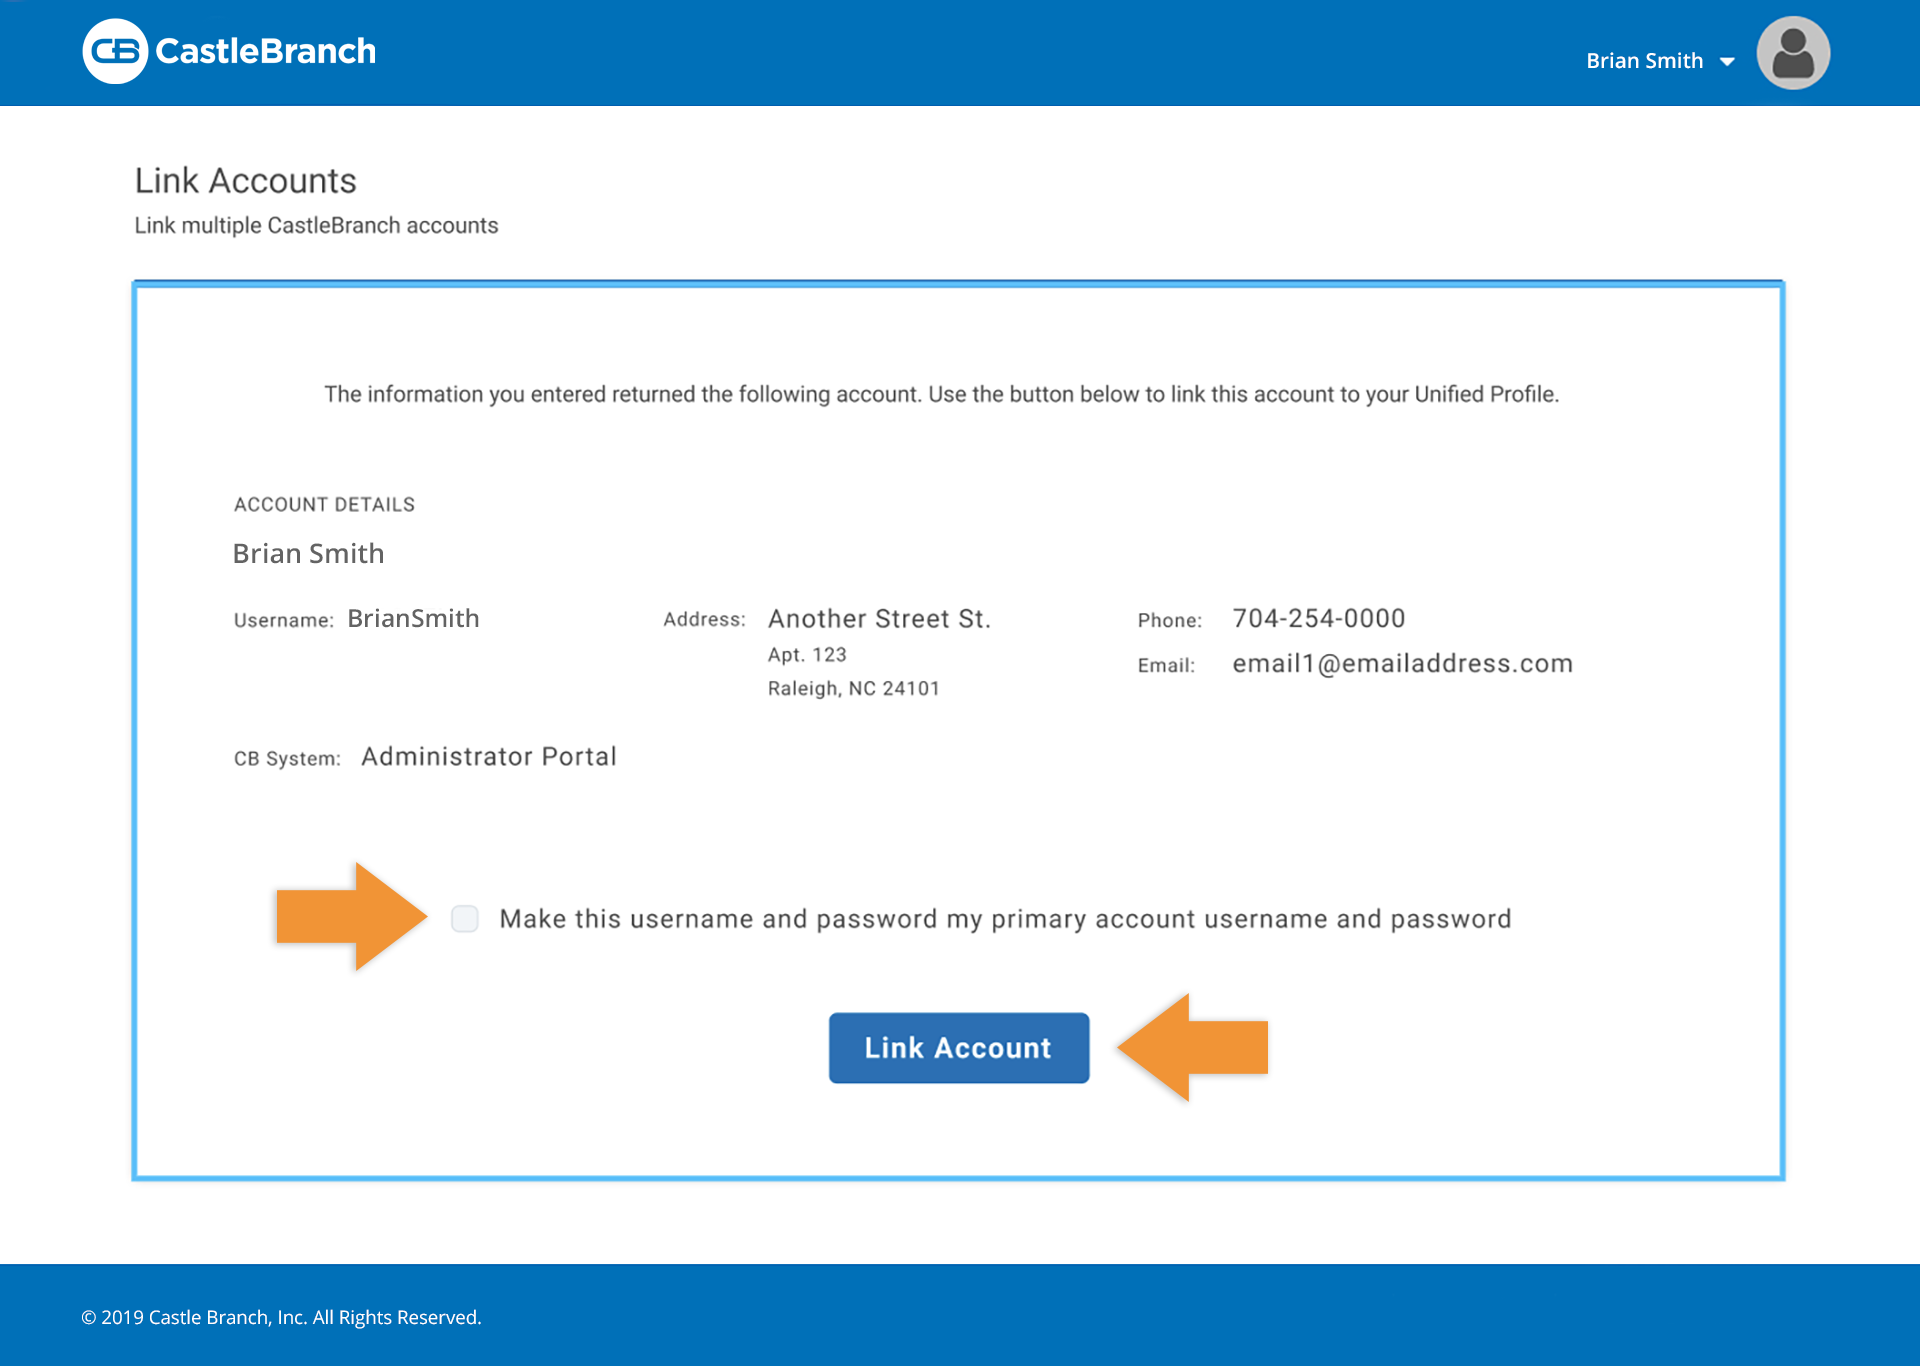 CastleBranch Simple Sign in Process–Link Existing CastleBranch Accounts: Link Accounts checkbox to make selected username as the primary sign-in credentials.